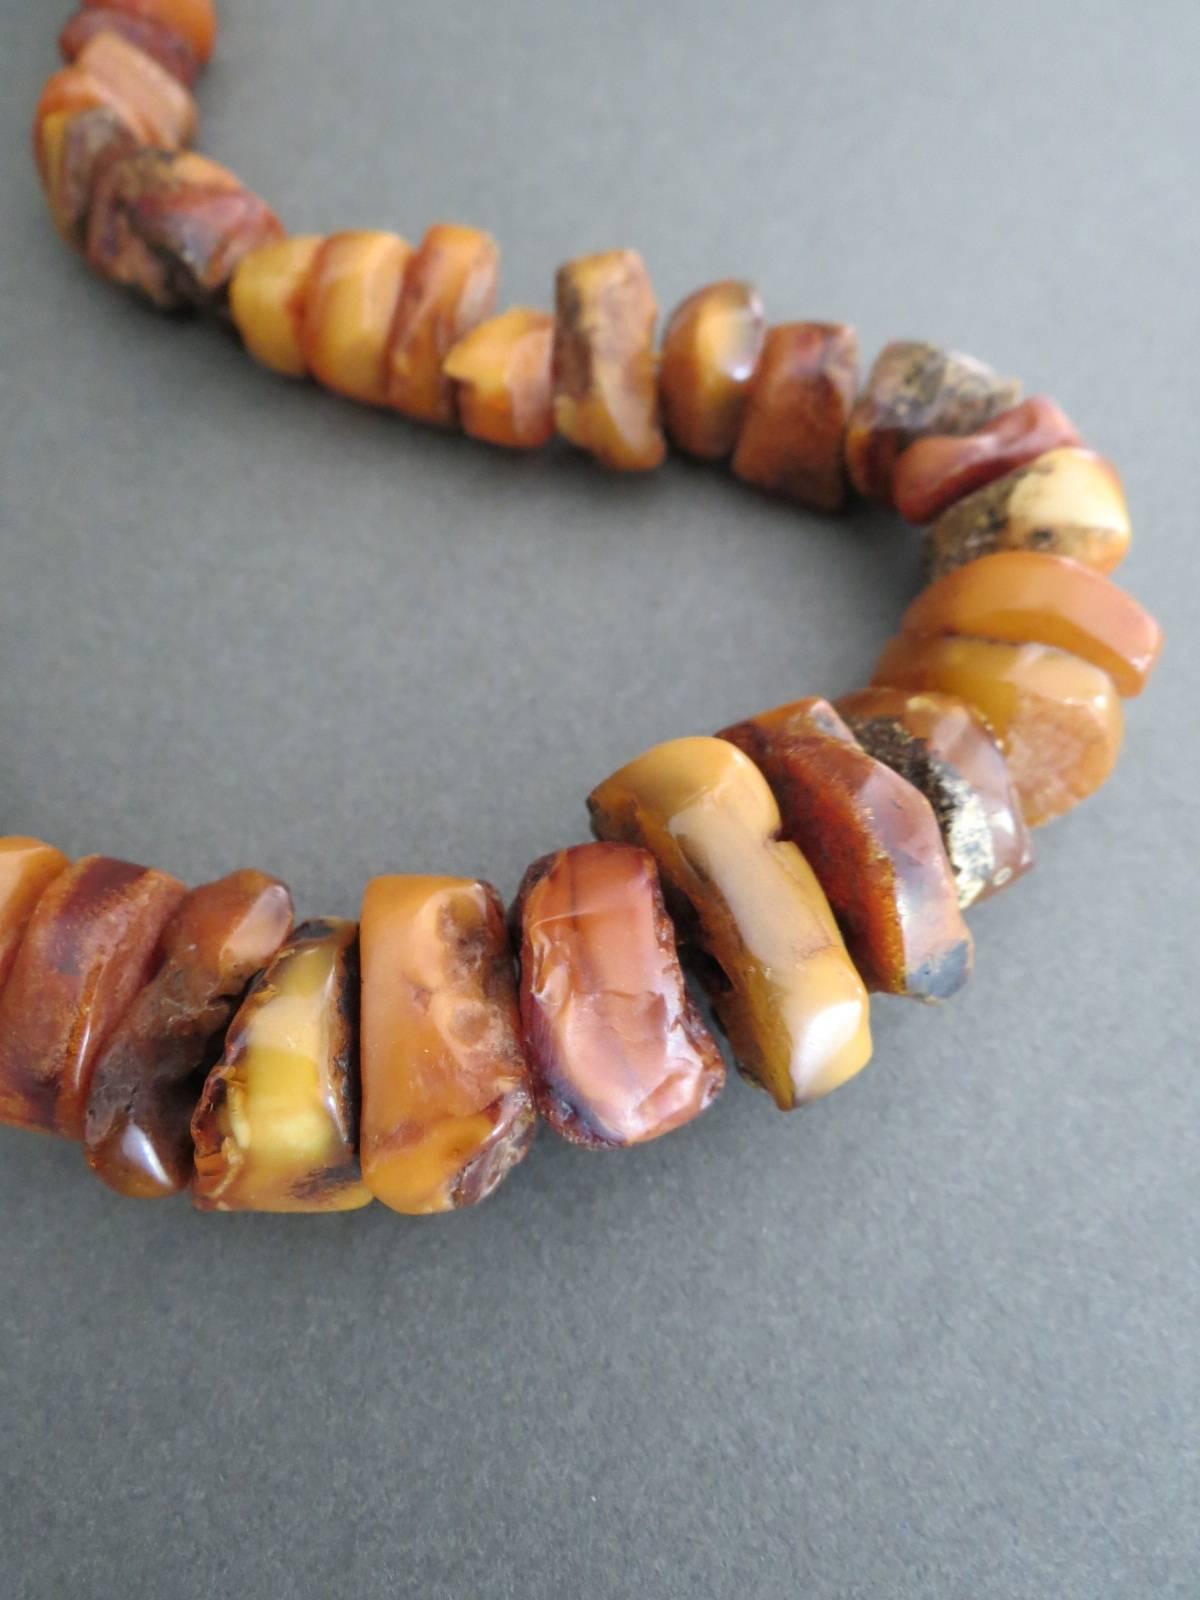 This is lovely large natural rustic baltic amber necklace and in good vintage condition. Amazing hand made beads and finished with vintage clasp. The necklace is restrung that it would be safe to wear .
Item Specifics
Length: 49cm (approx